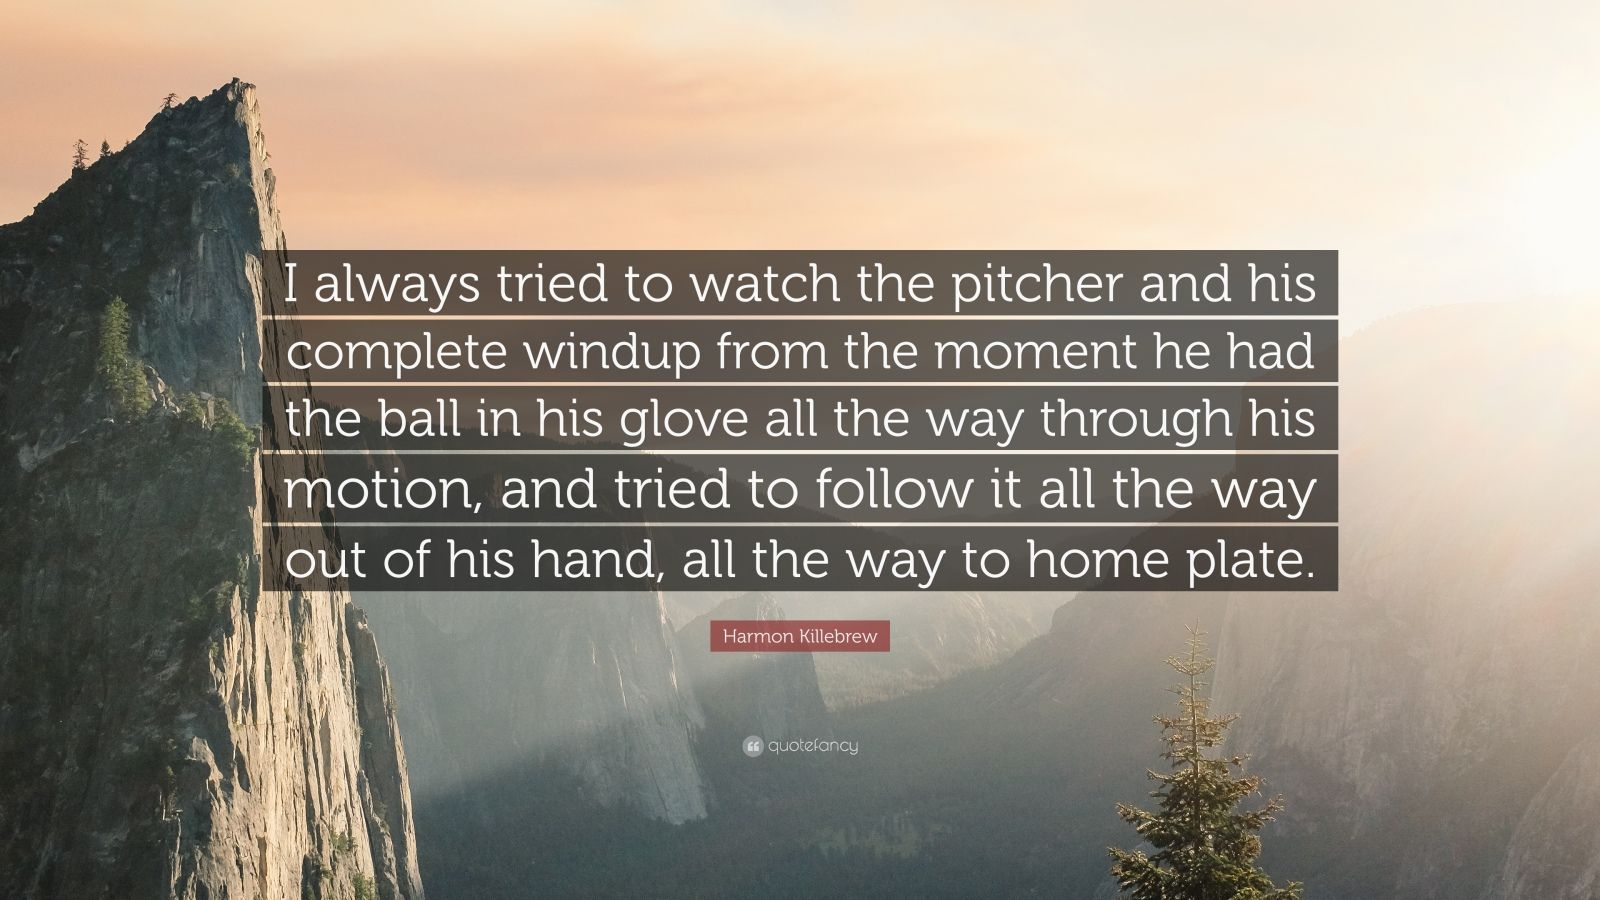 Harmon Killebrew Quote: “I always tried to watch the pitcher and